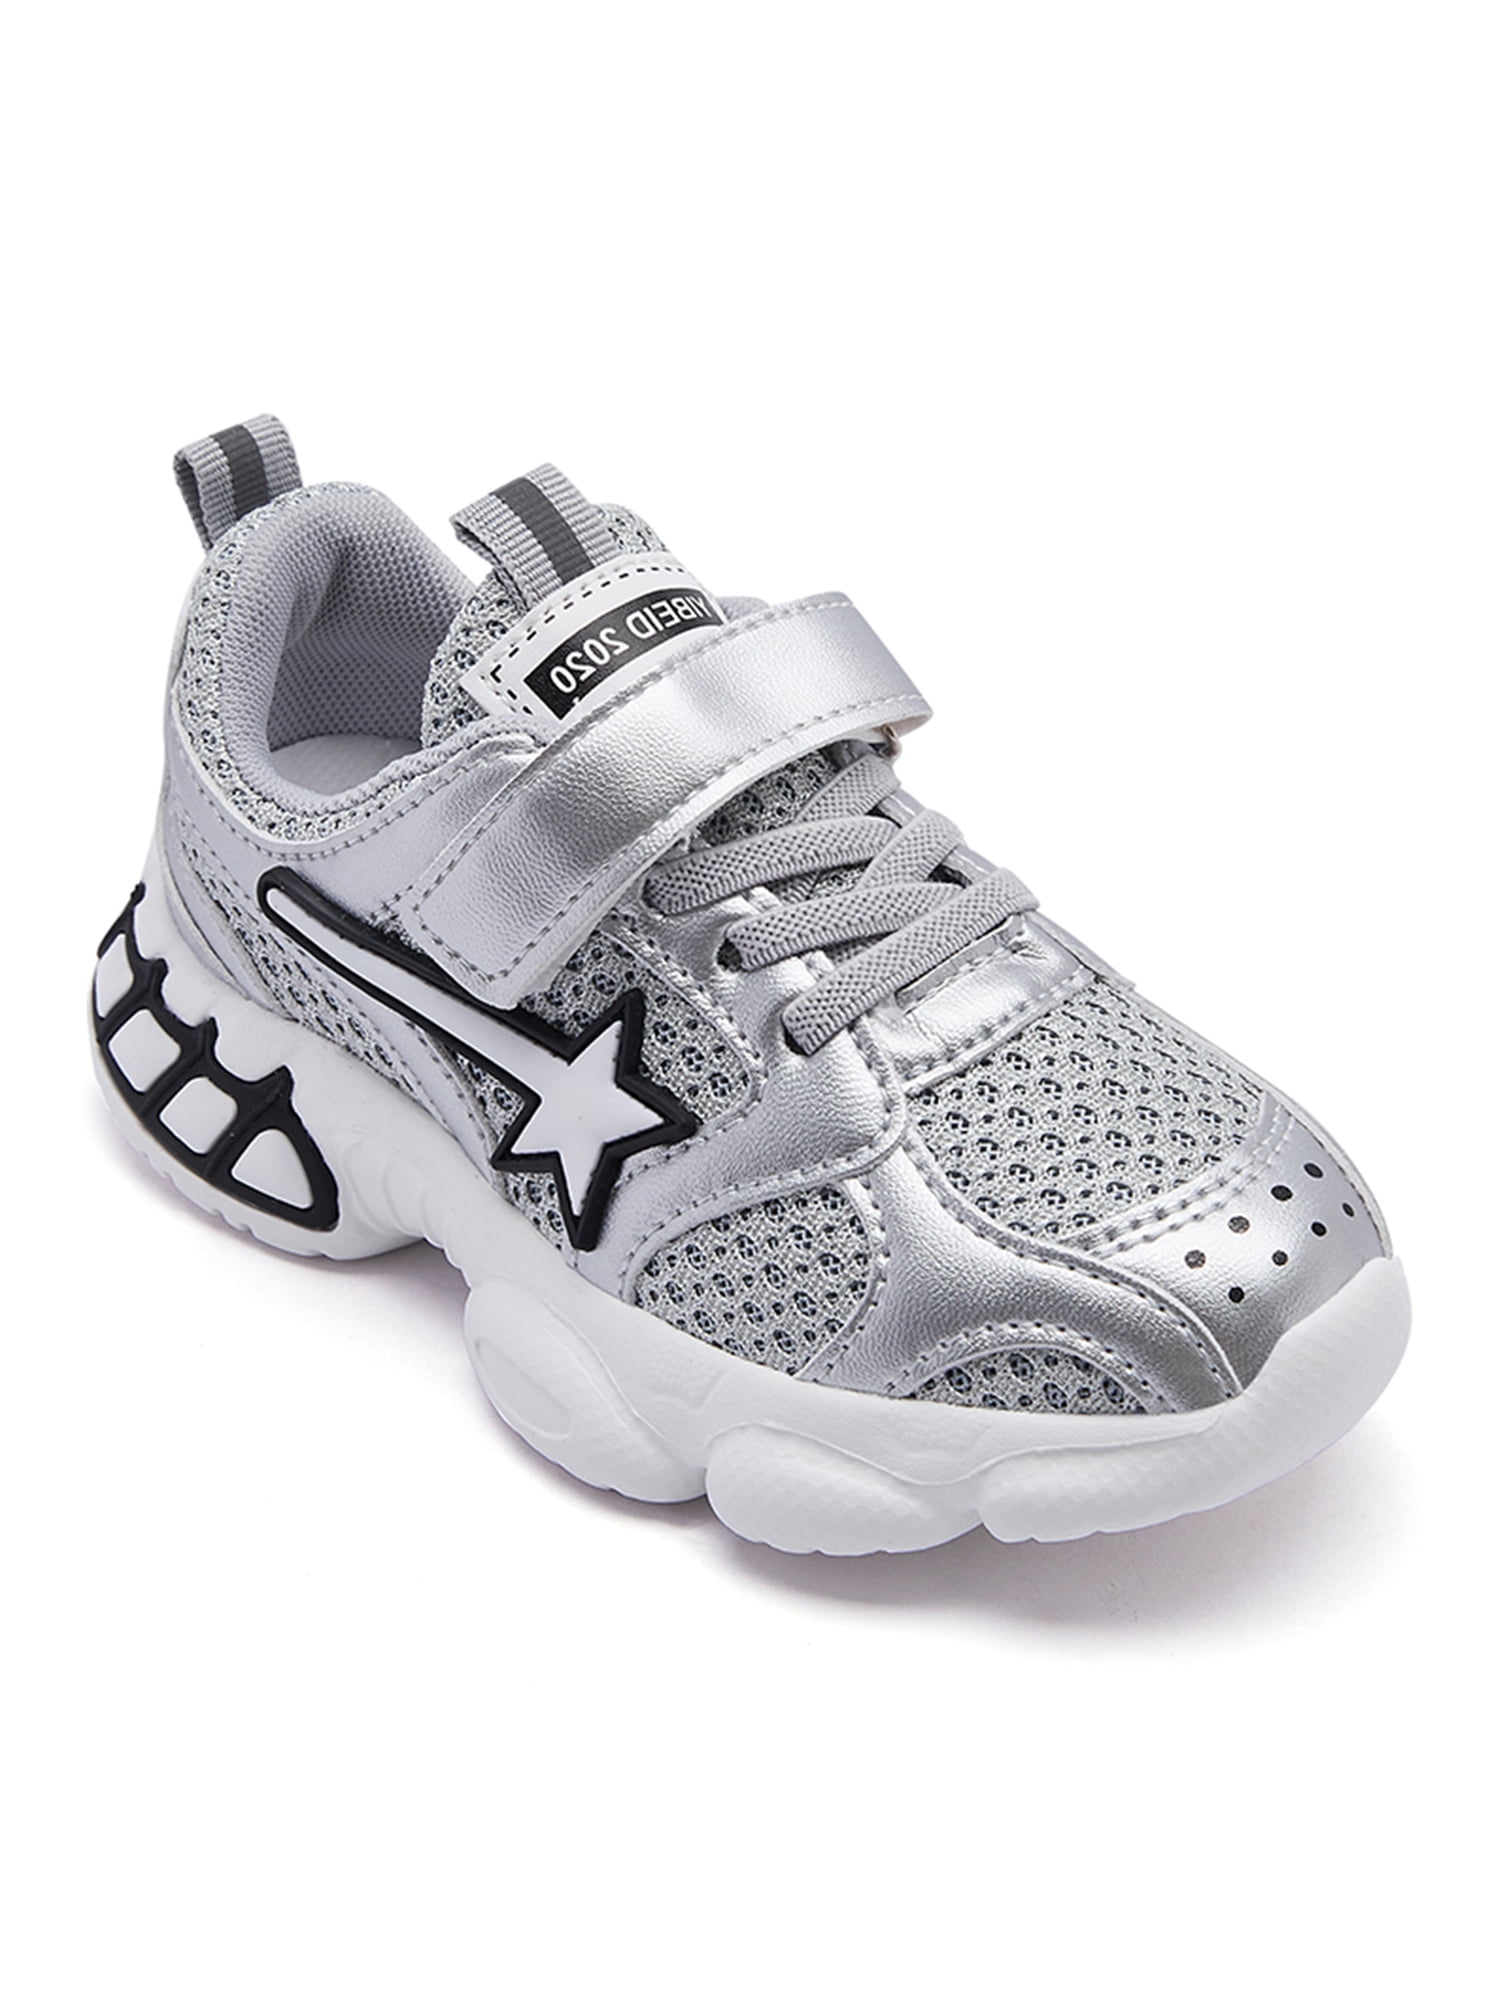 Z-T FUTURE Kids Baby Boy Girl Sneakers Breathable Mesh Lightweight Toddler Shoes for Walking Running Beach Pool